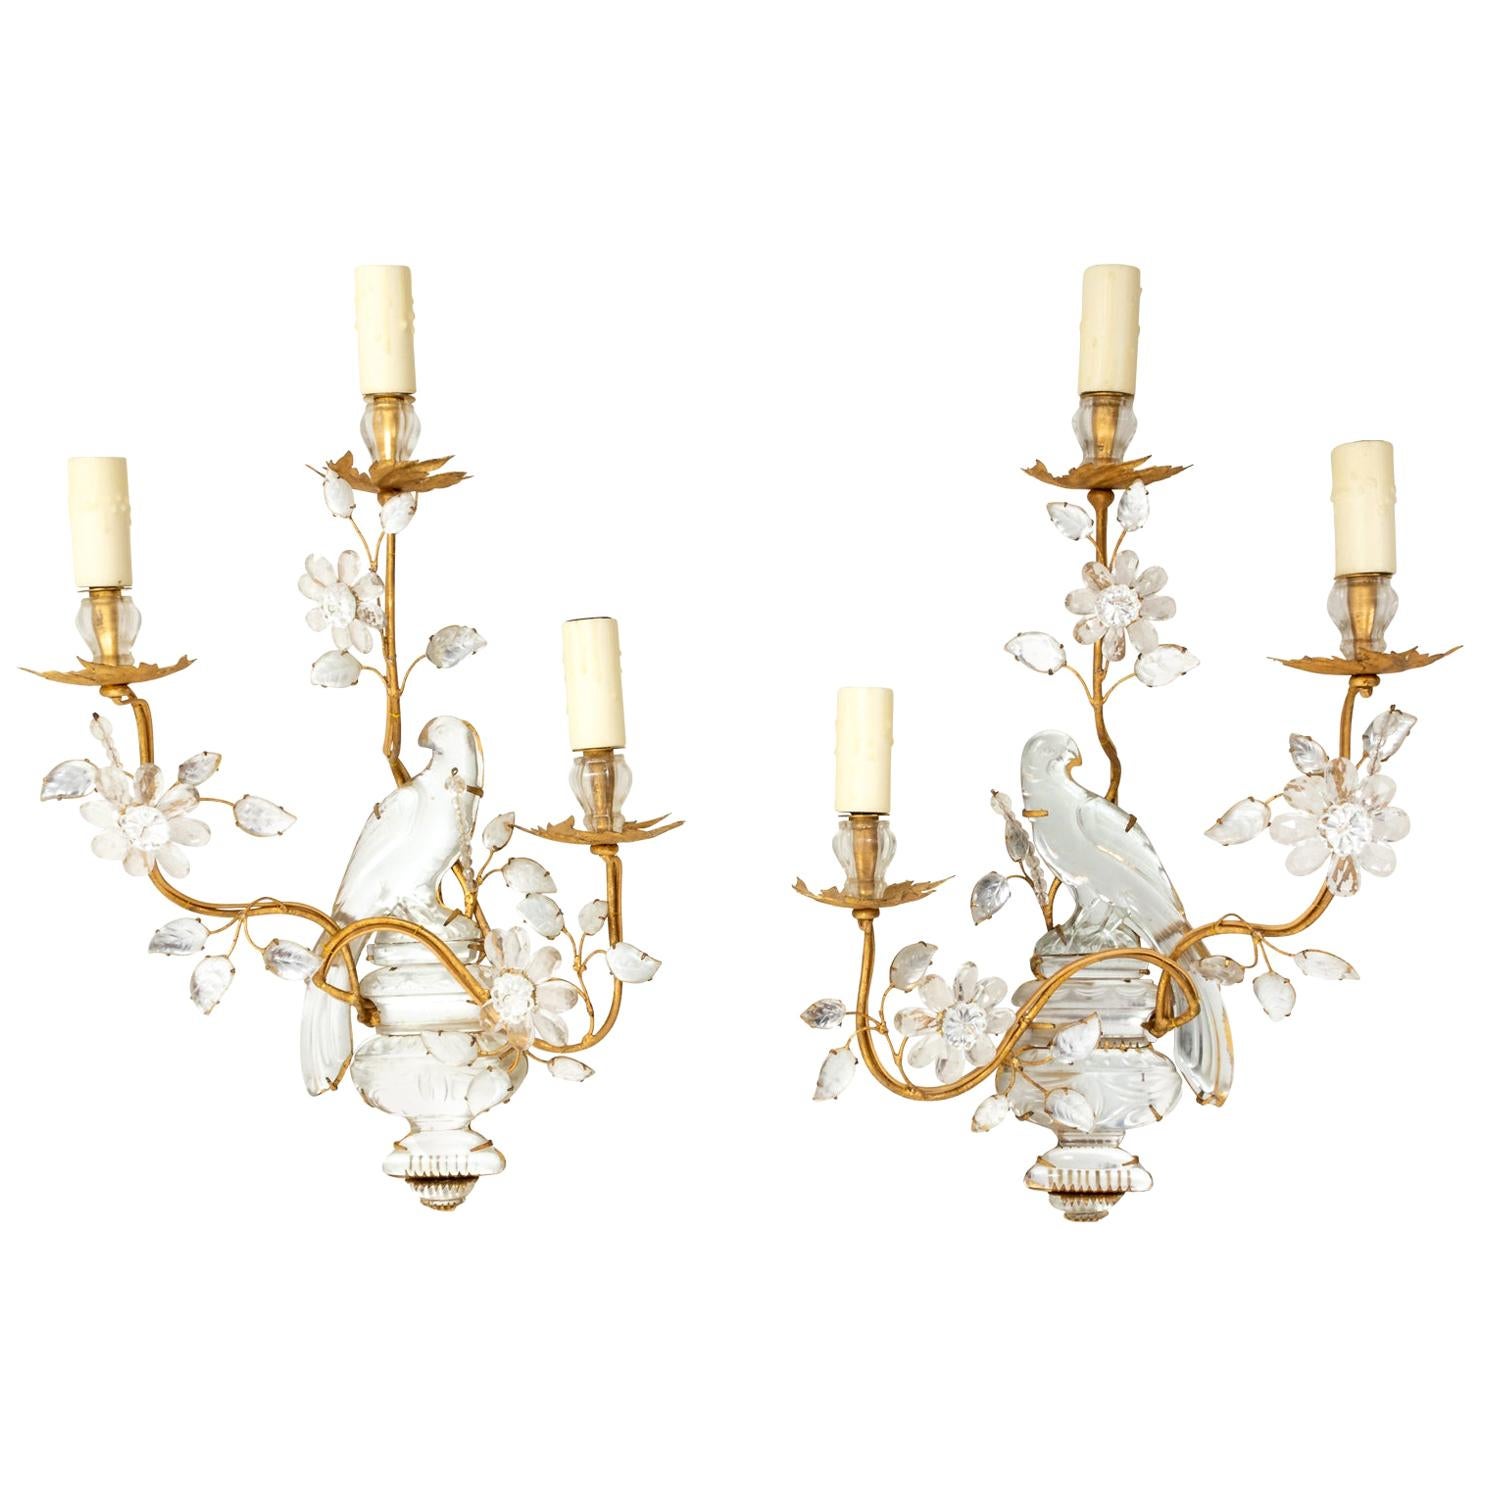 Pair of Bird and Urn Form Crystal Sconces